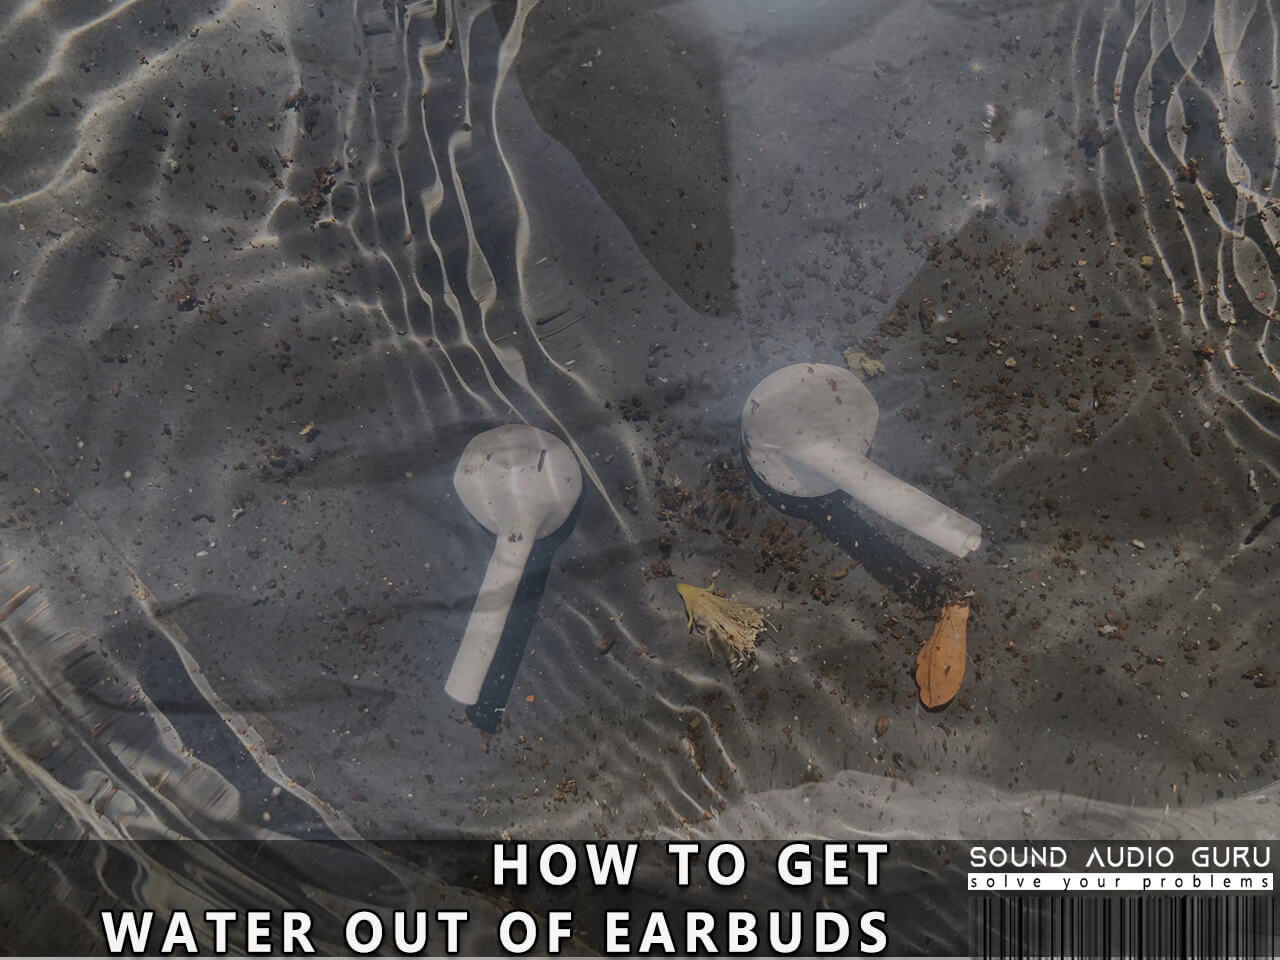 How to Get Water Out of Earbud